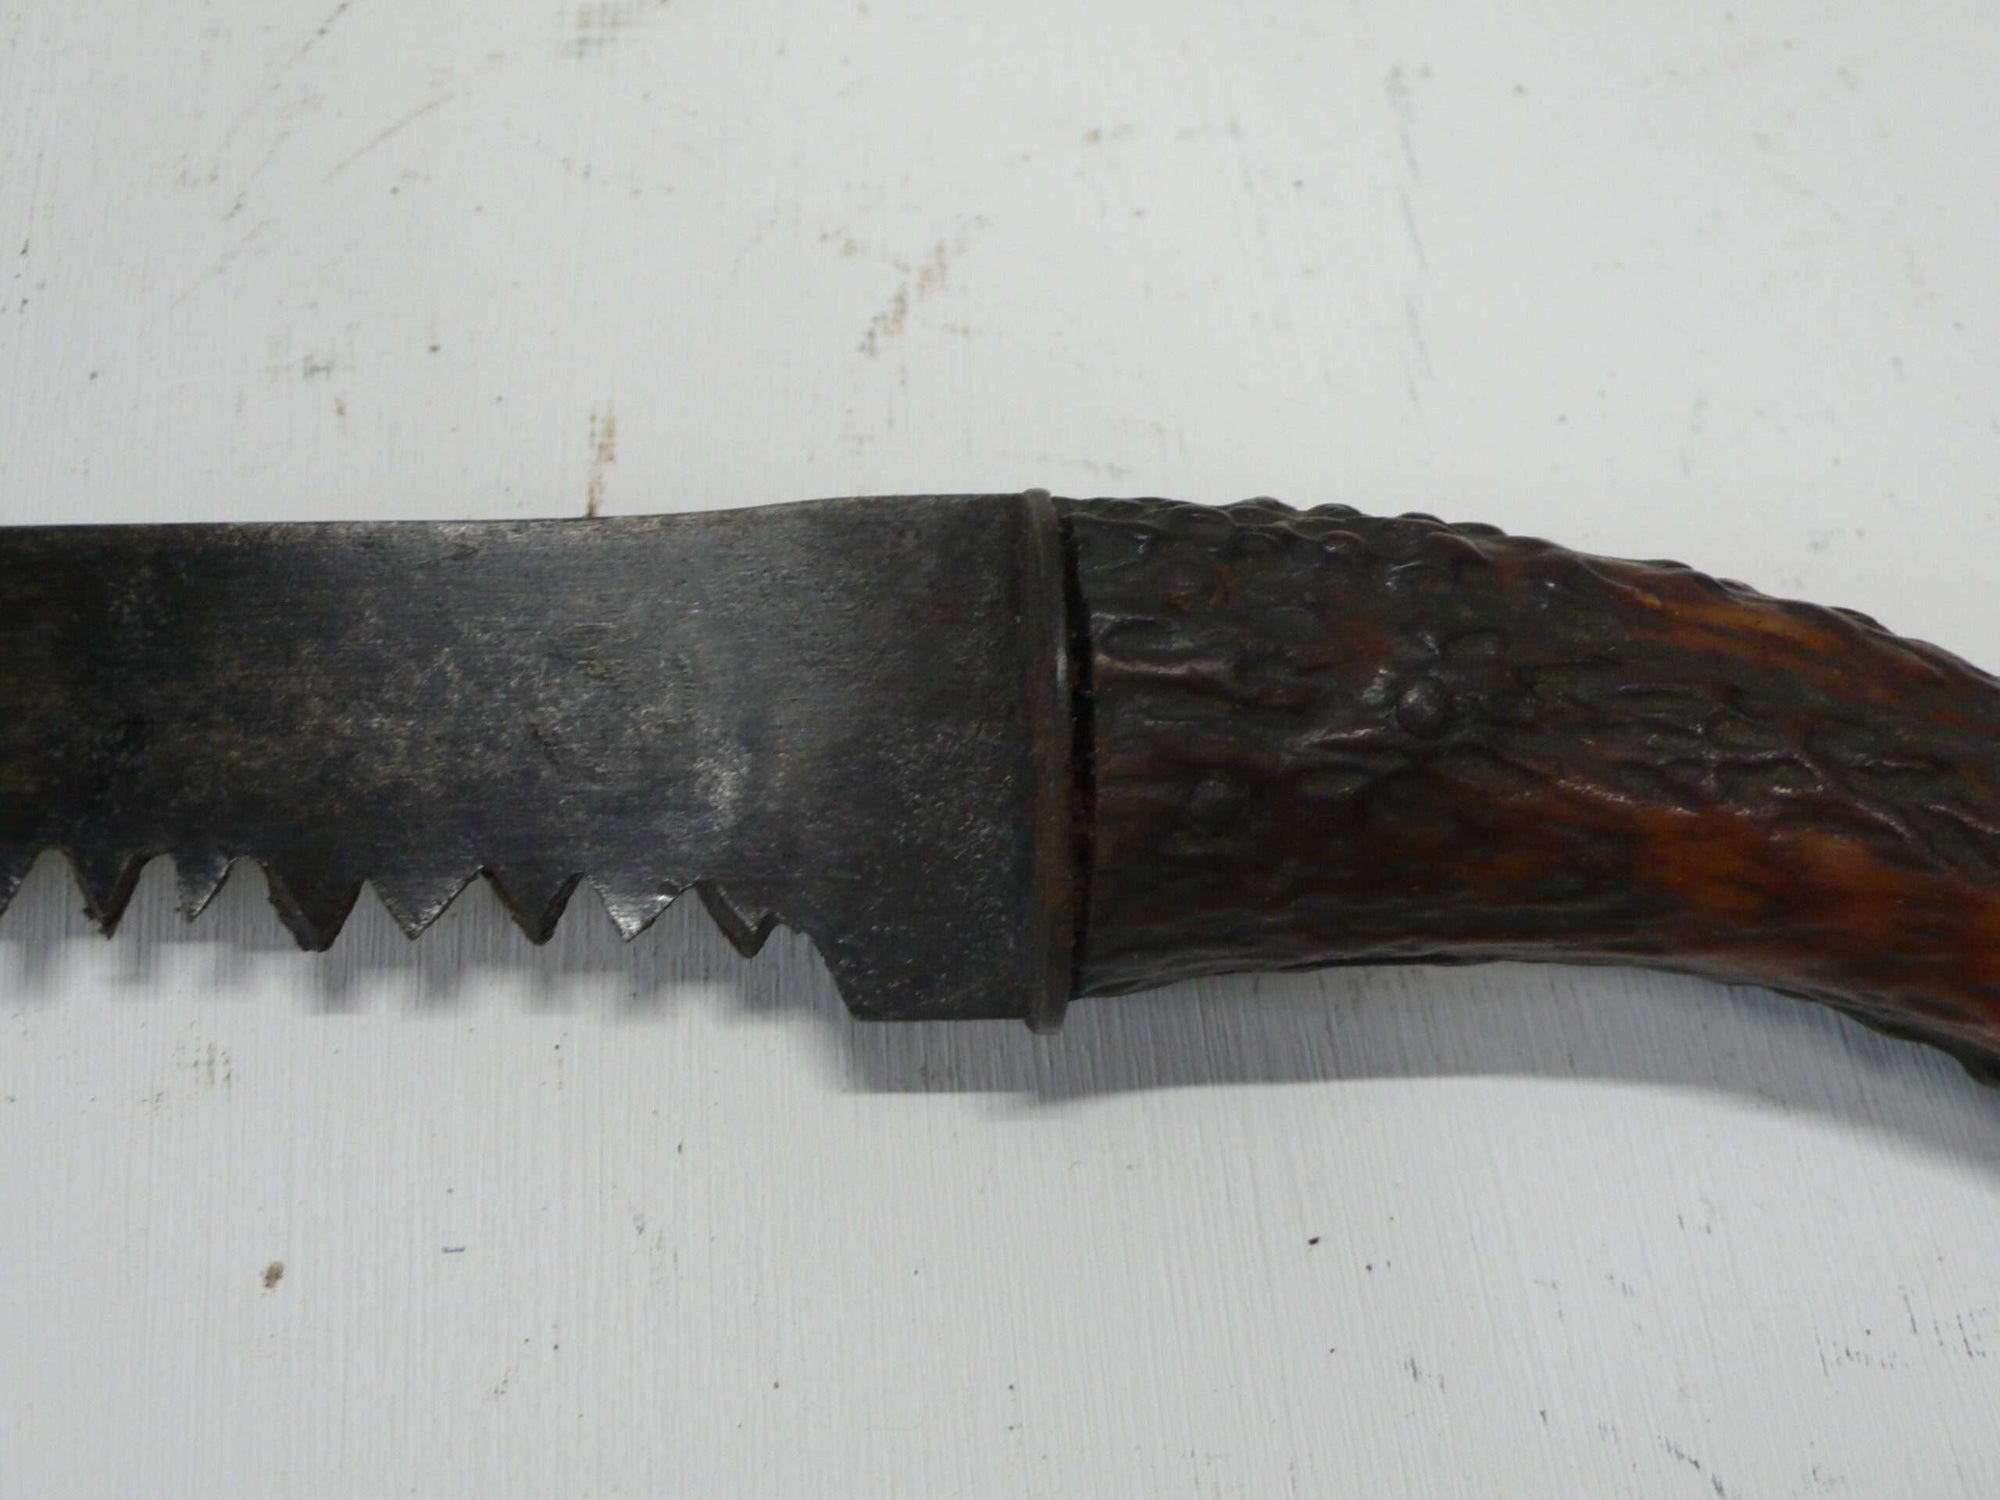 French Pruning Saw